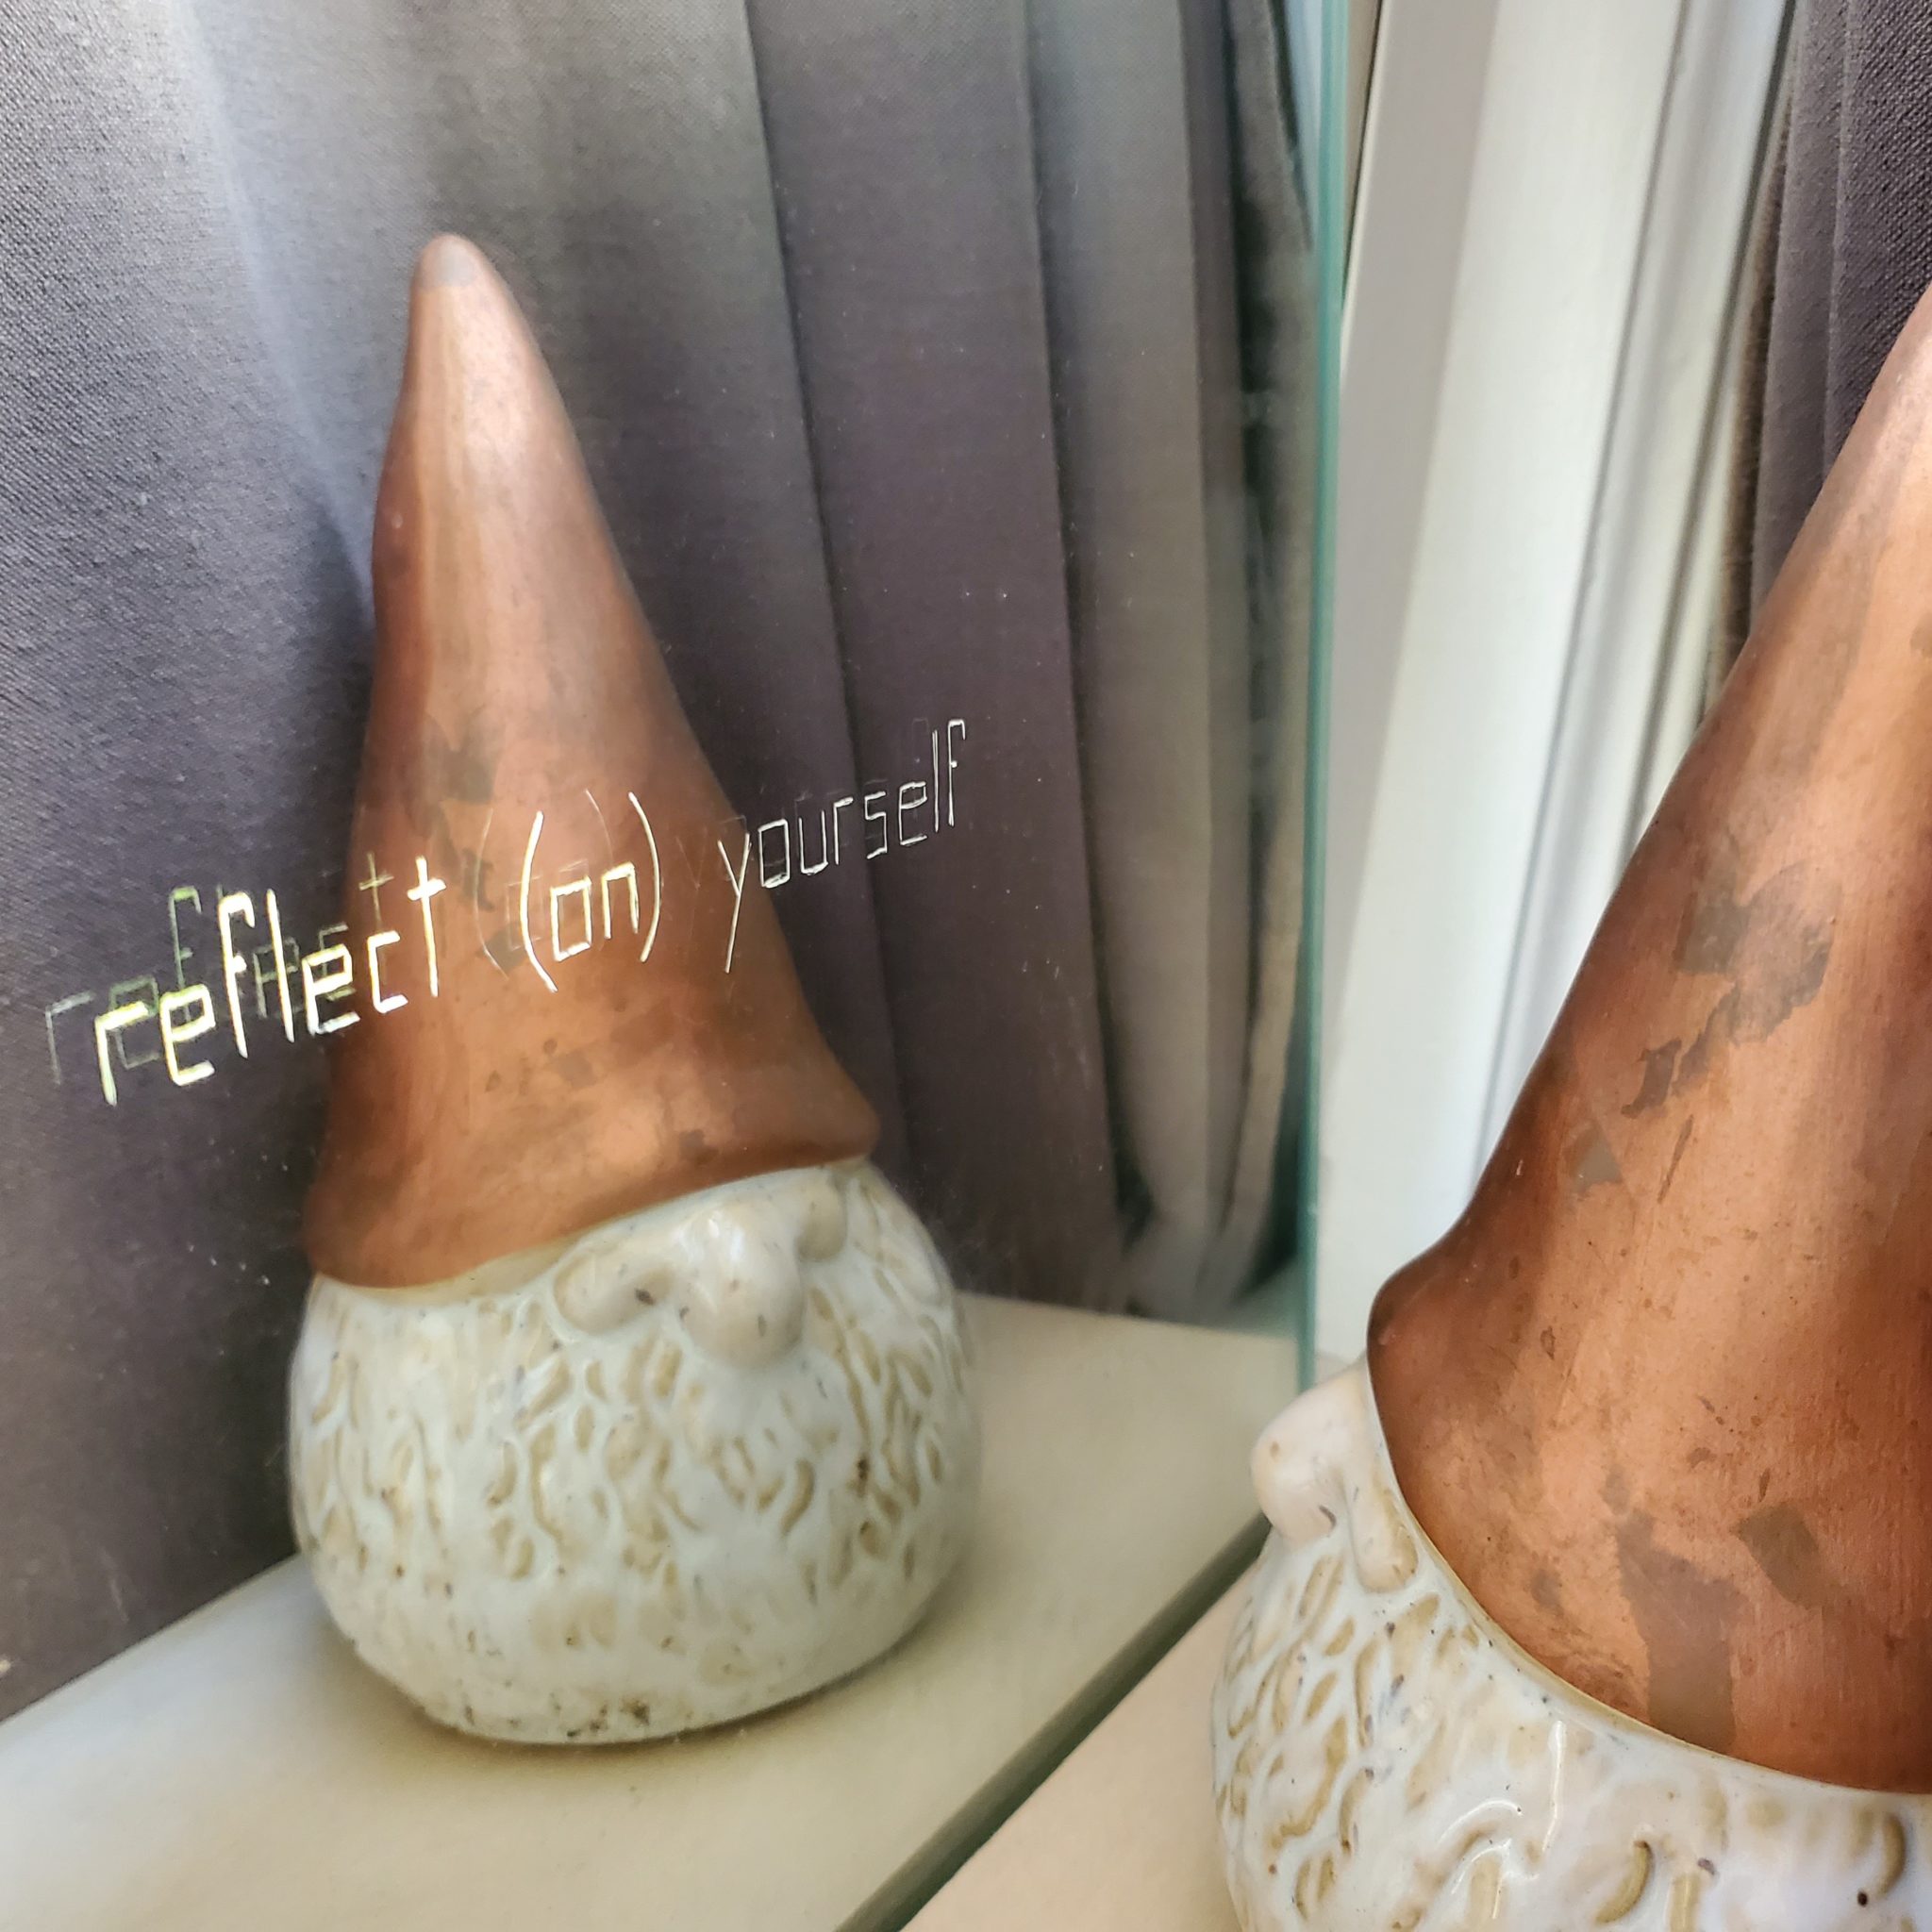 A gnome figure with a bronze pointy hat looks at themself in the mirror. Words on their reflection read 'reflect (on) yourself'